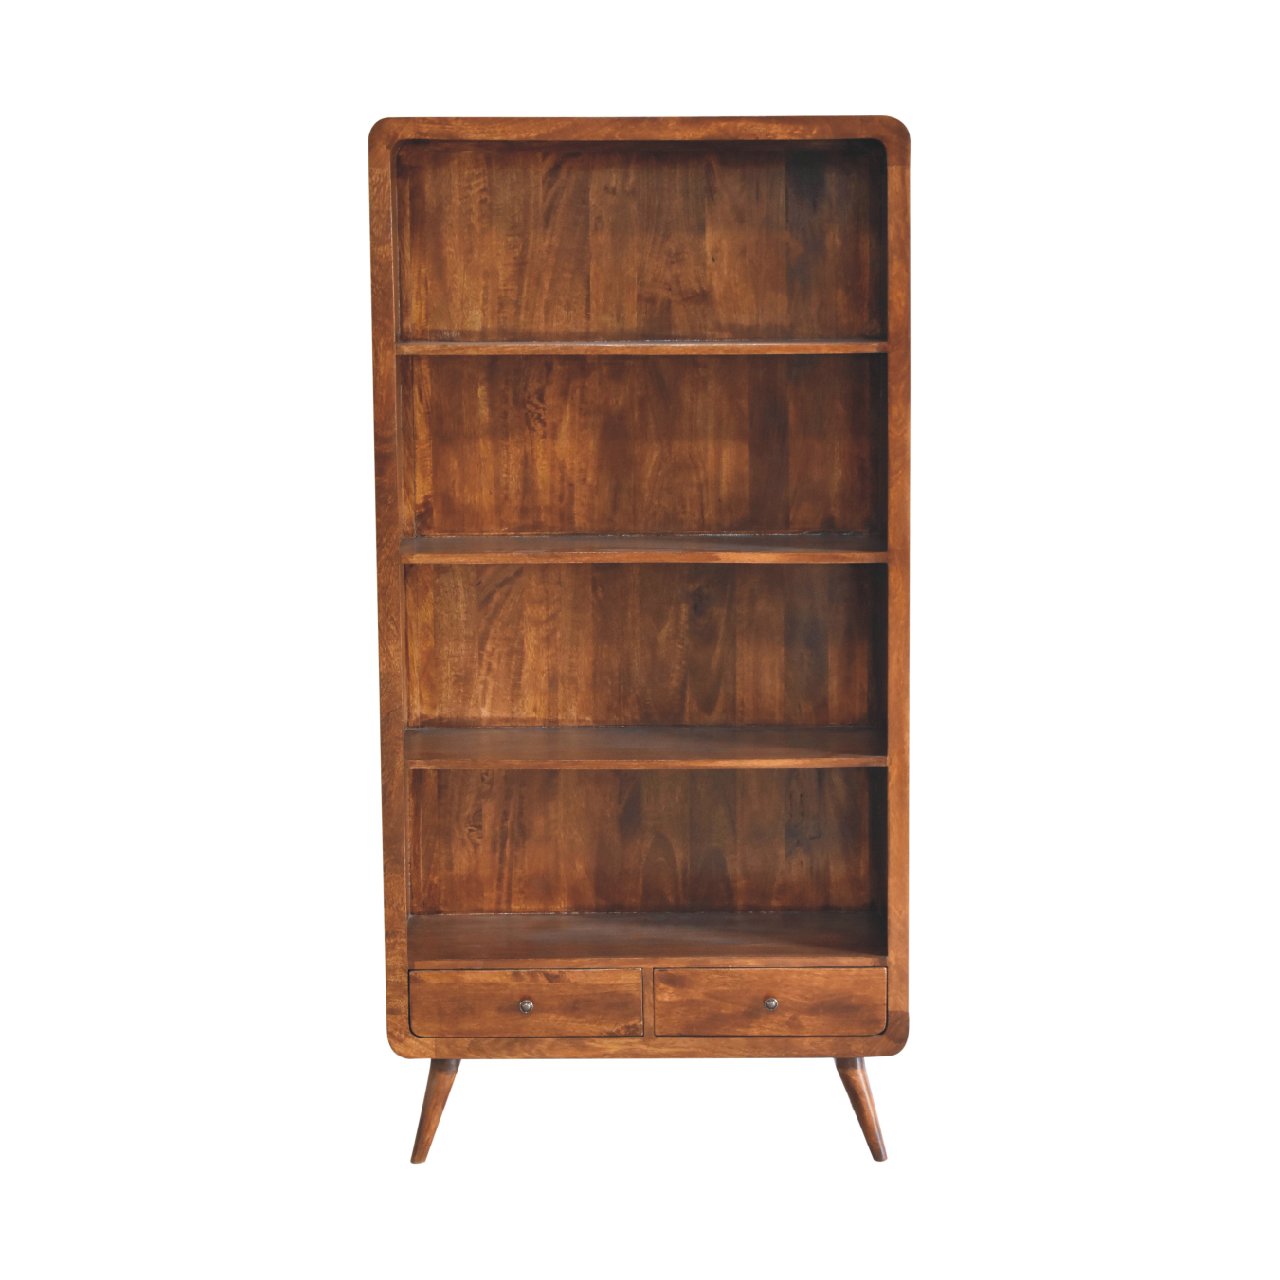 View Curved Chestnut Bookcase information